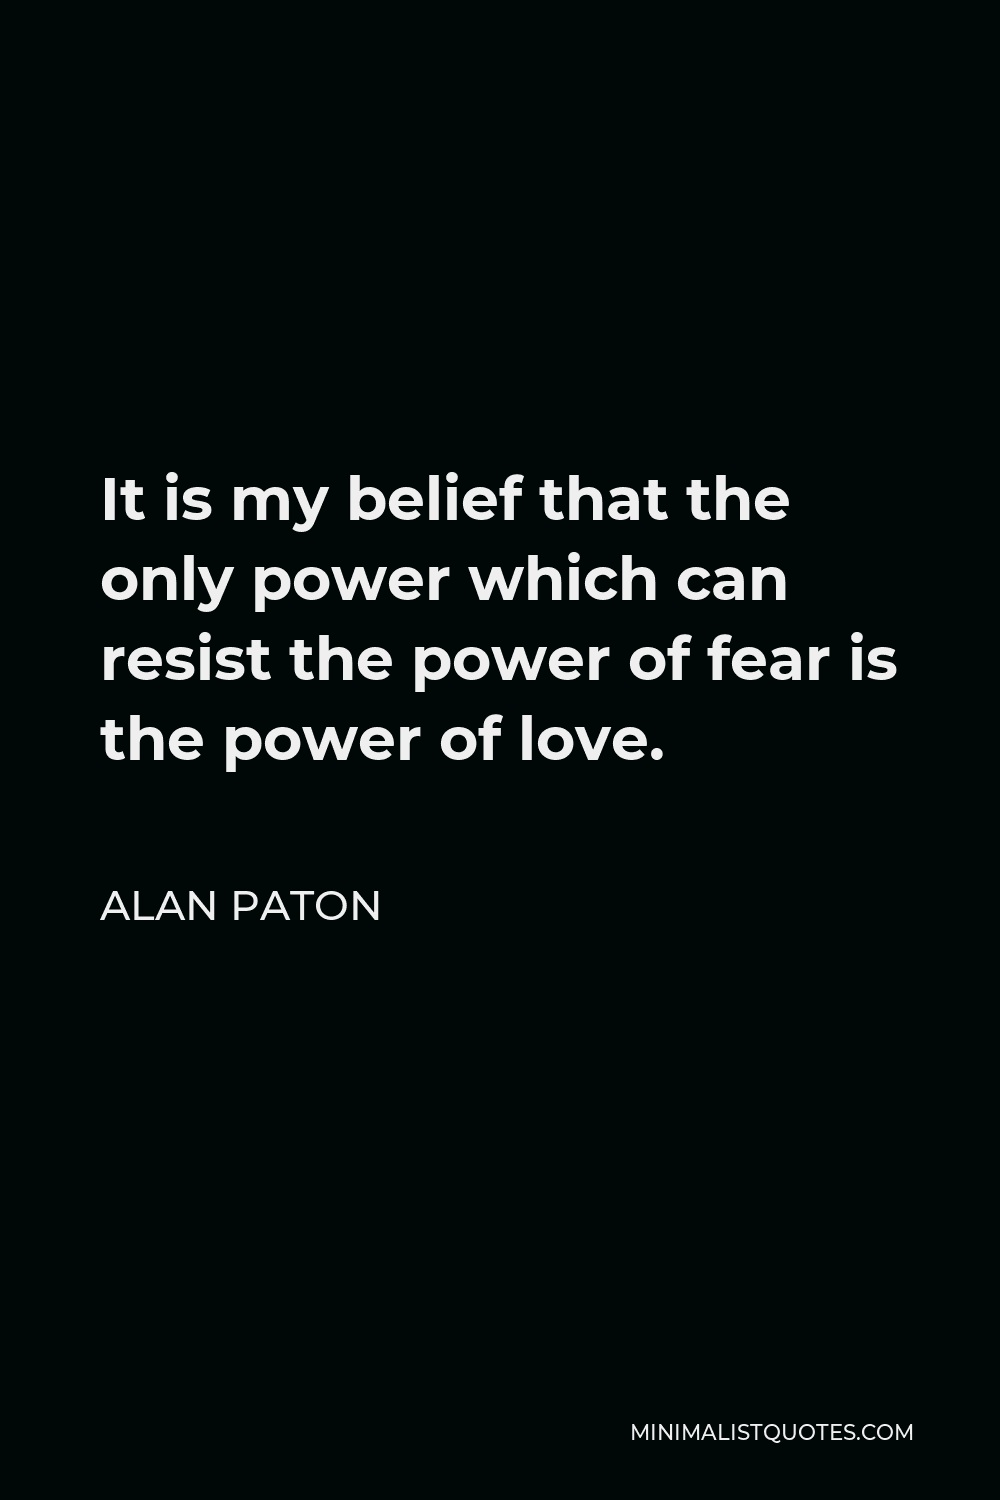 Alan Paton Quote - It is my belief that the only power which can resist the power of fear is the power of love.